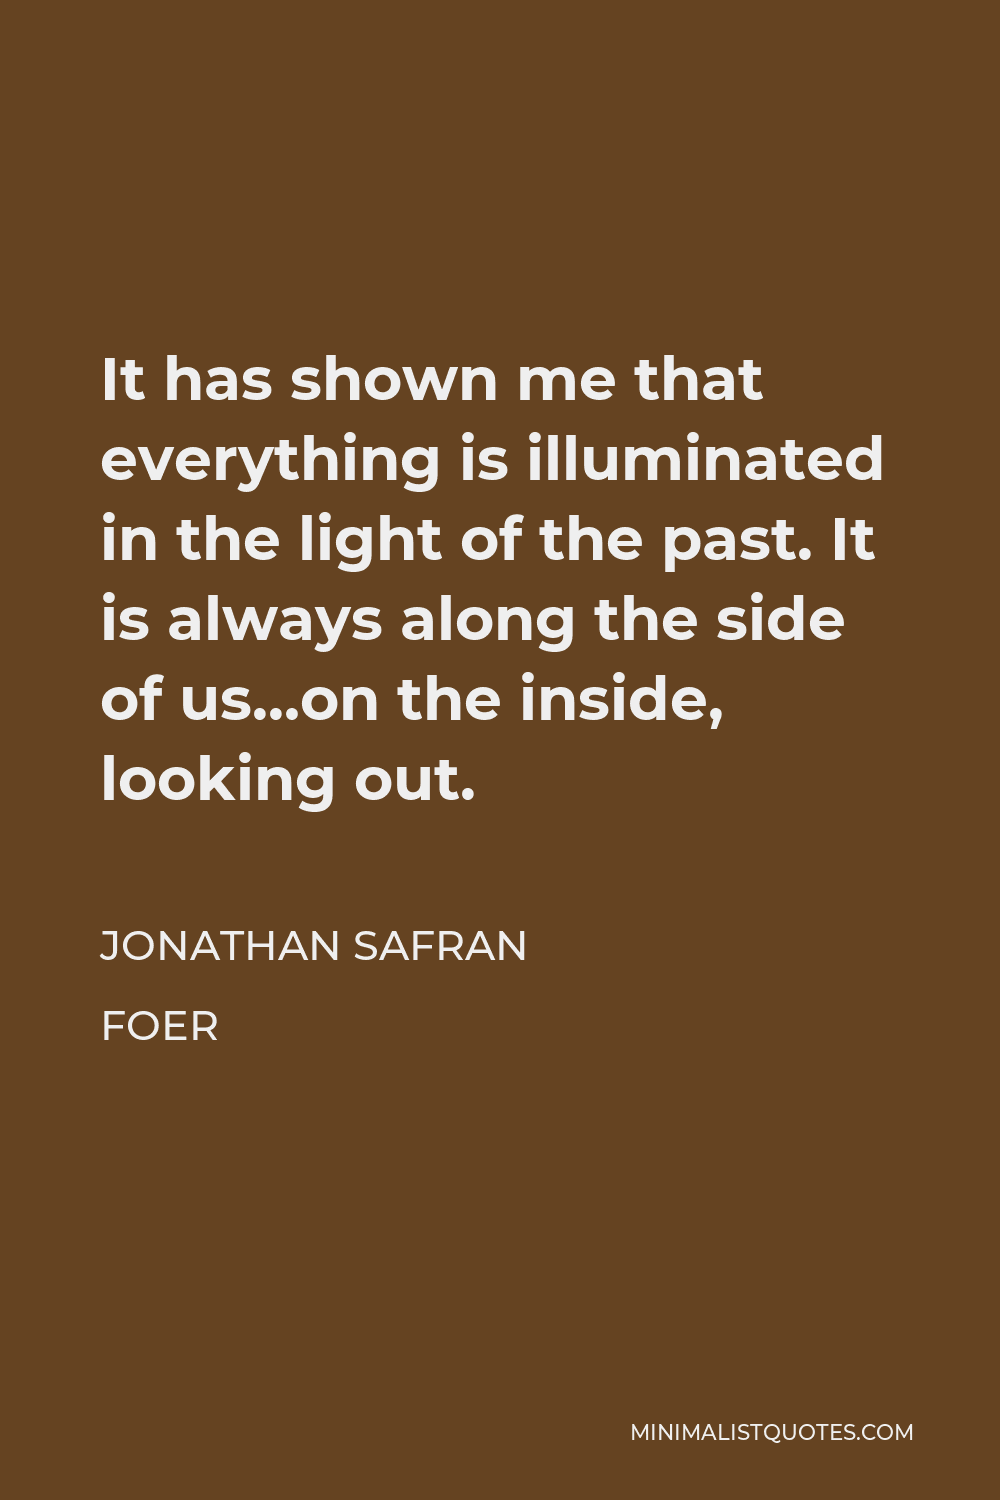 Jonathan Safran Foer Quote - It has shown me that everything is illuminated in the light of the past. It is always along the side of us…on the inside, looking out.